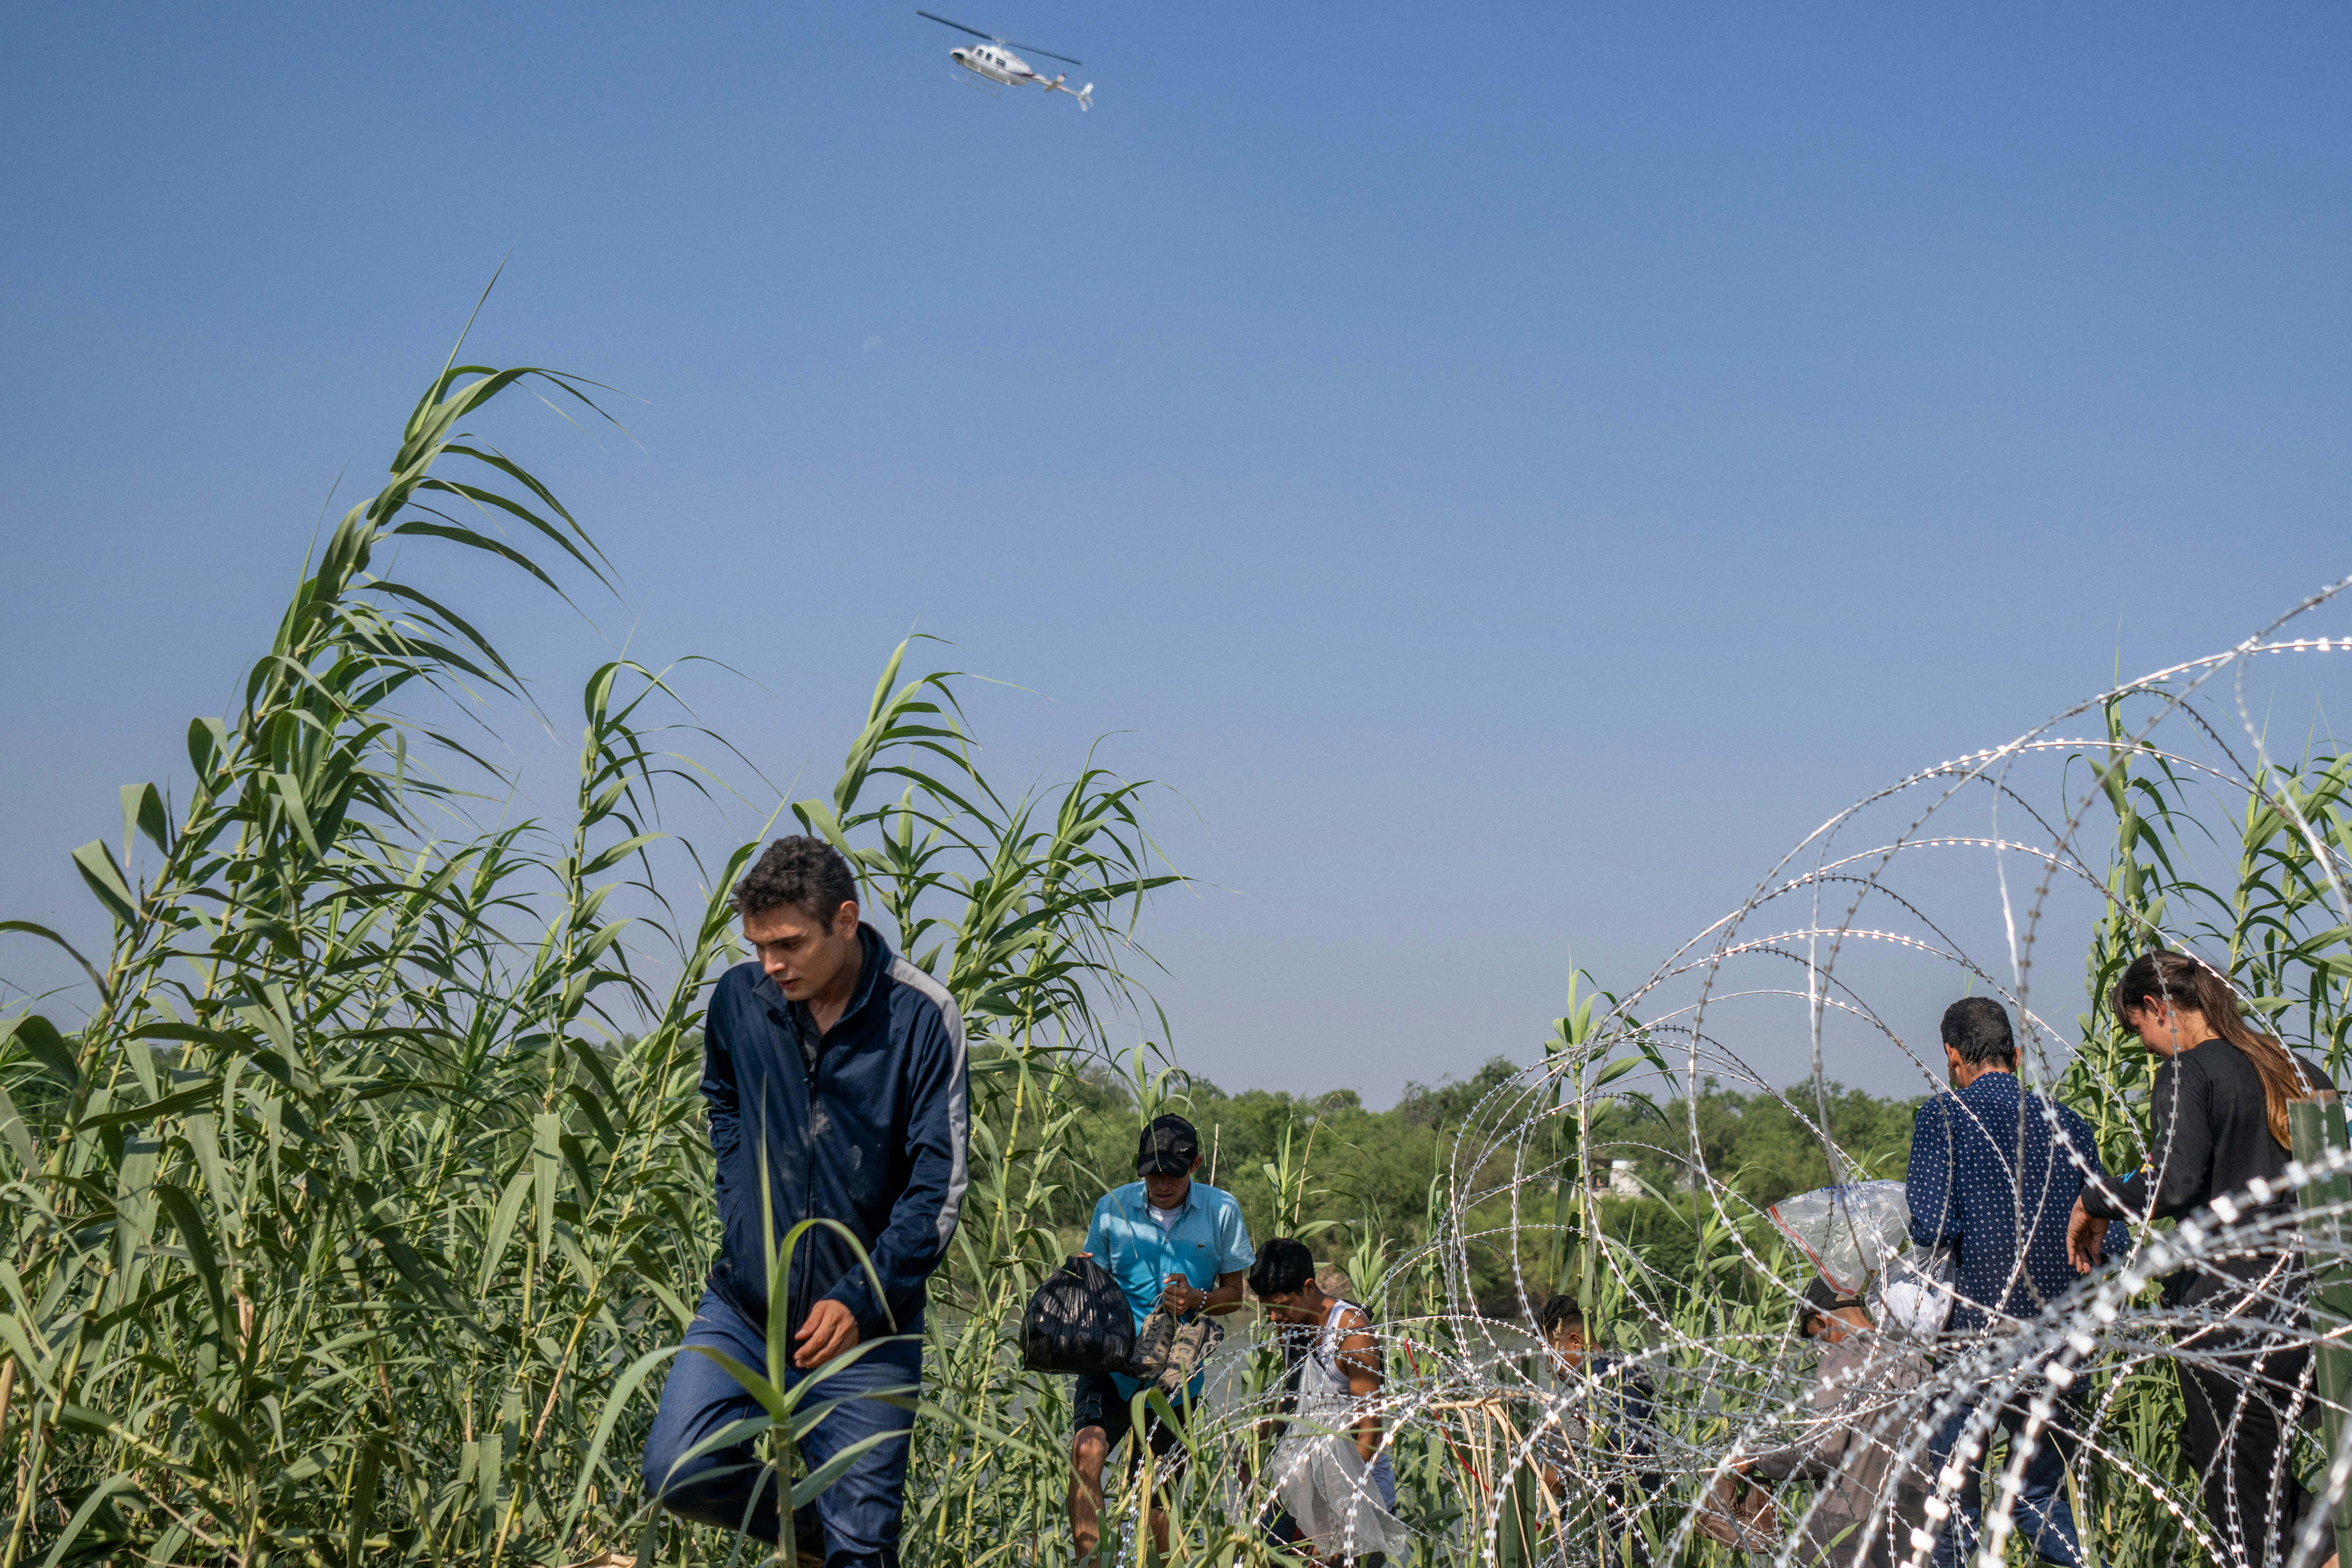 EAGLE PASS, TEXAS - MAY 21: Migrants from El Salvador walk through brush alongside the banks of the Rio Grande after crossing into the U.S. on May 21, 2022 in Eagle Pass, Texas. Title 42, the controversial pandemic-era border policy enacted by former President Trump, which cites COVID-19 as the reason to rapidly expel asylum seekers at the U.S. border, was set to officially expire on May 23rd. A federal judge in Louisiana delivered a ruling today blocking the Biden administration from lifting Title 42.  (Photo by Brandon Bell/Getty Images)